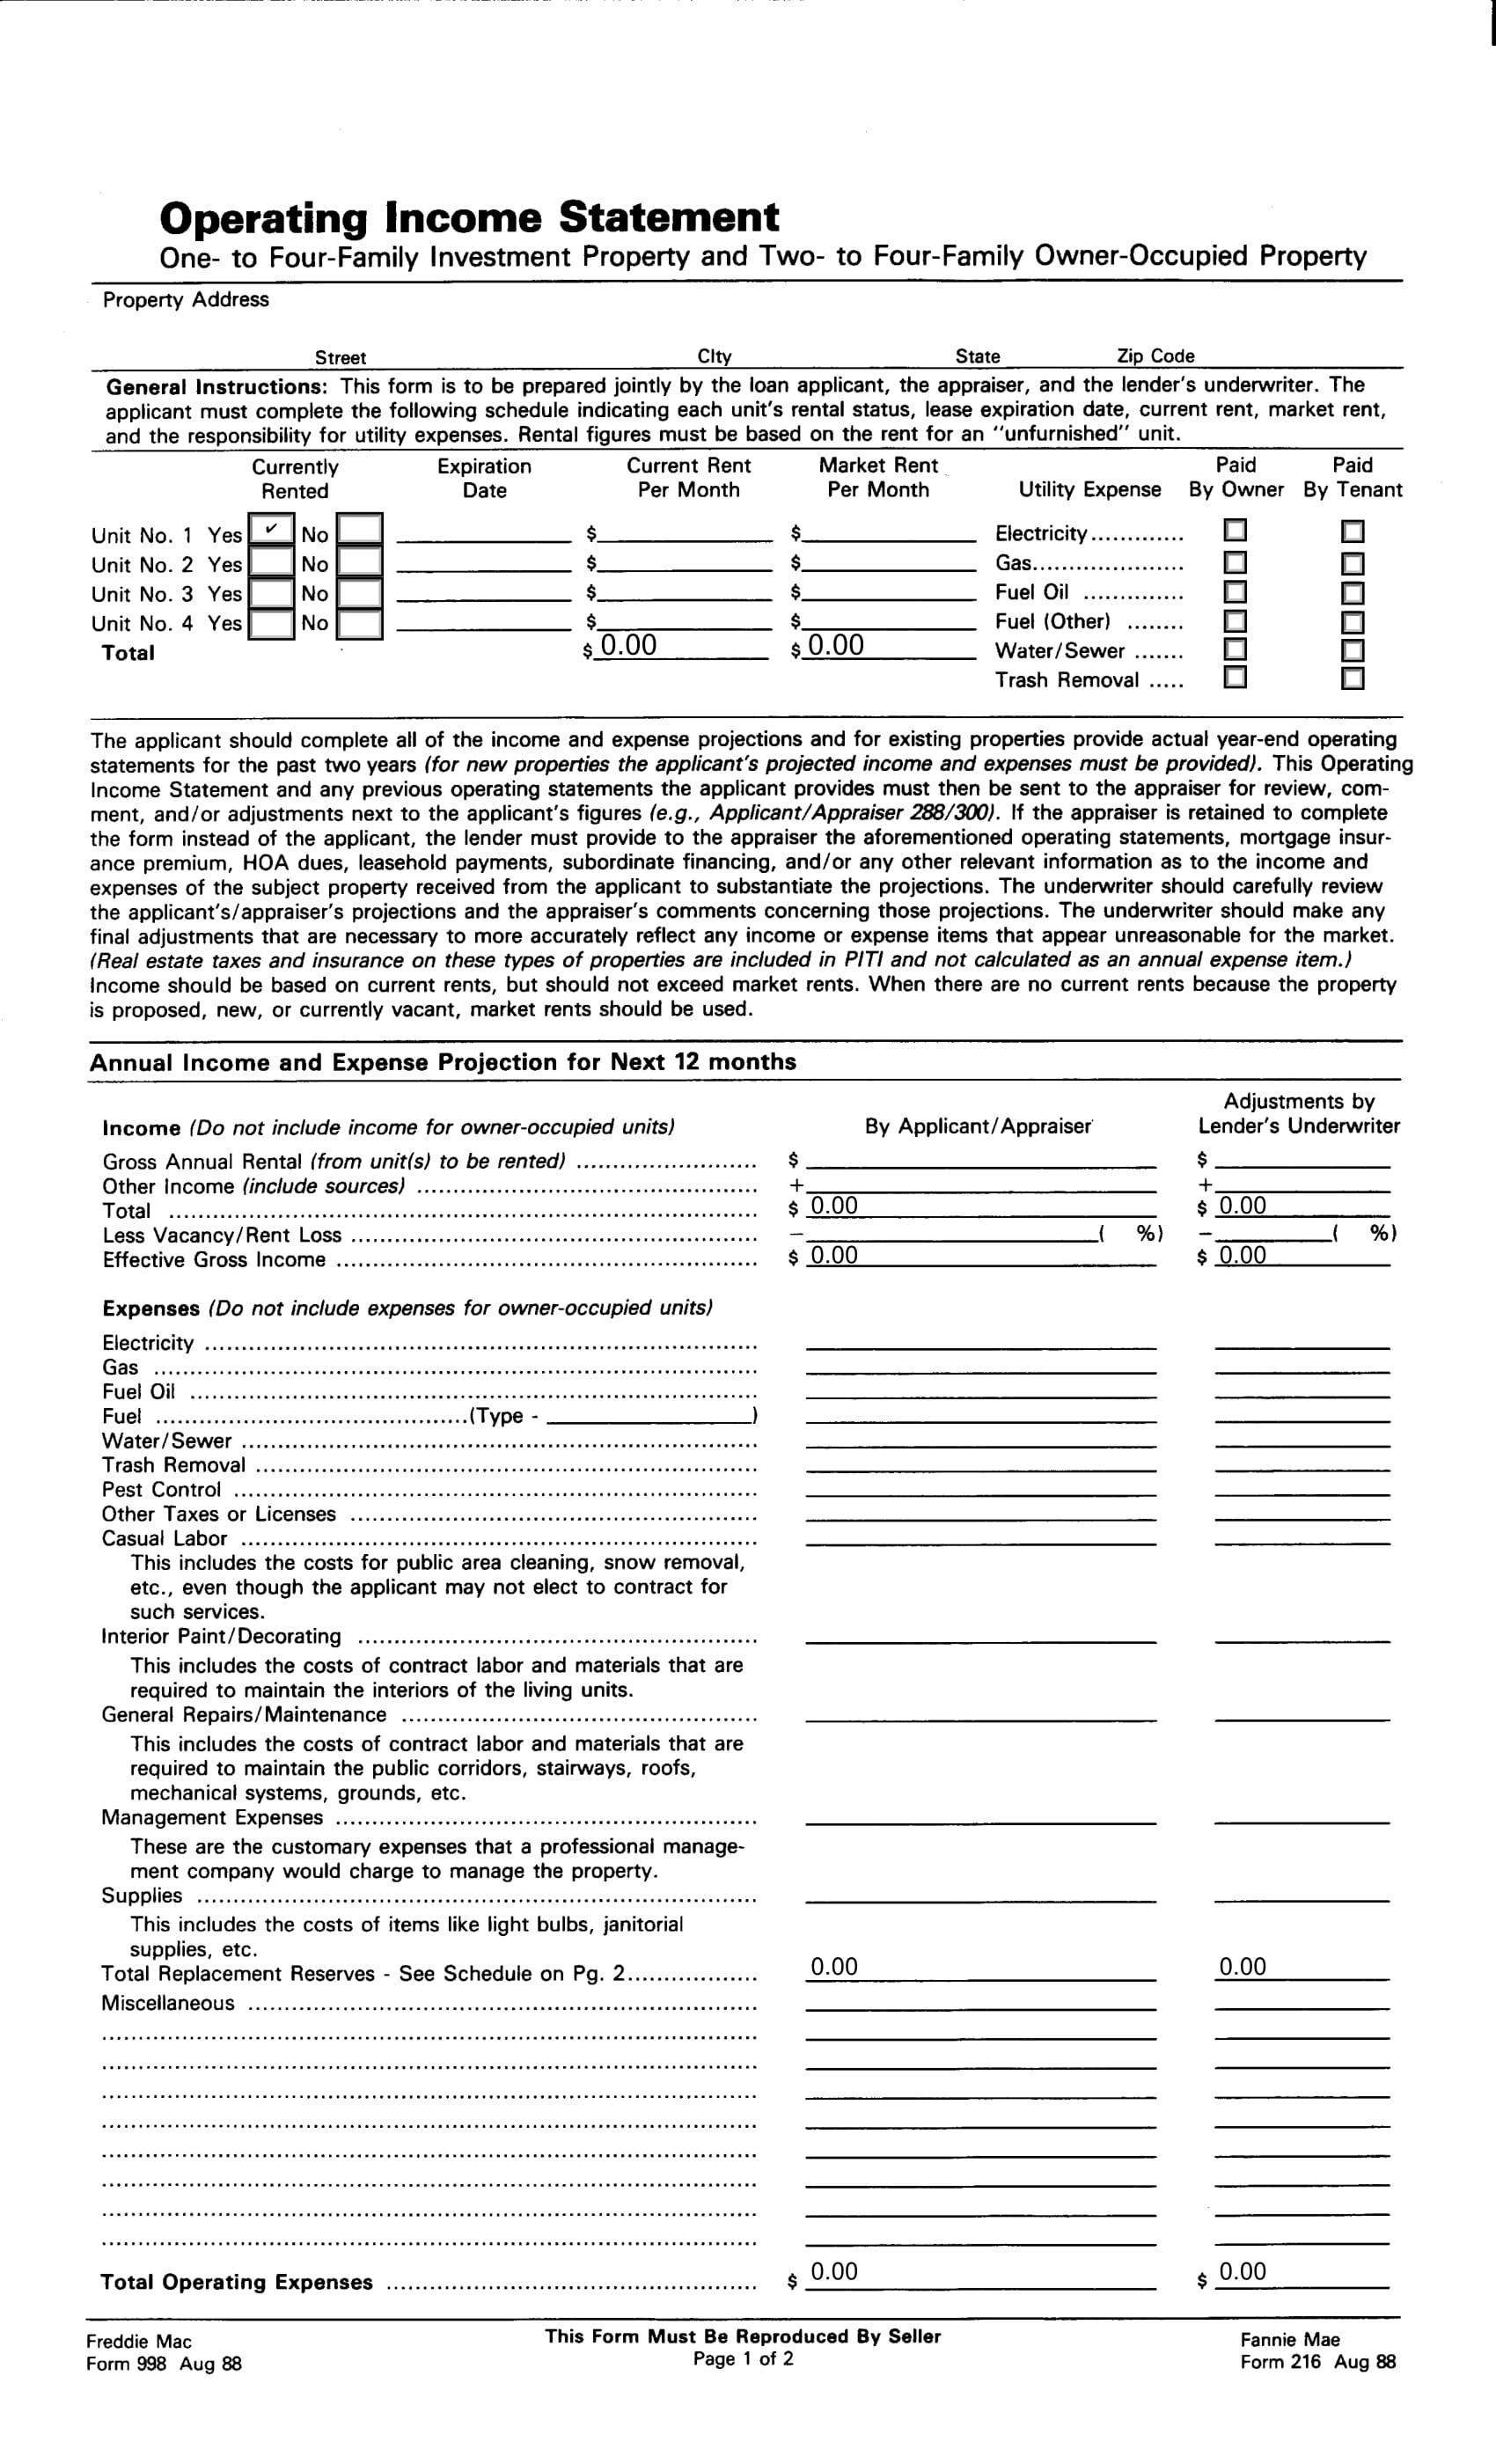 operating property income statement form 1